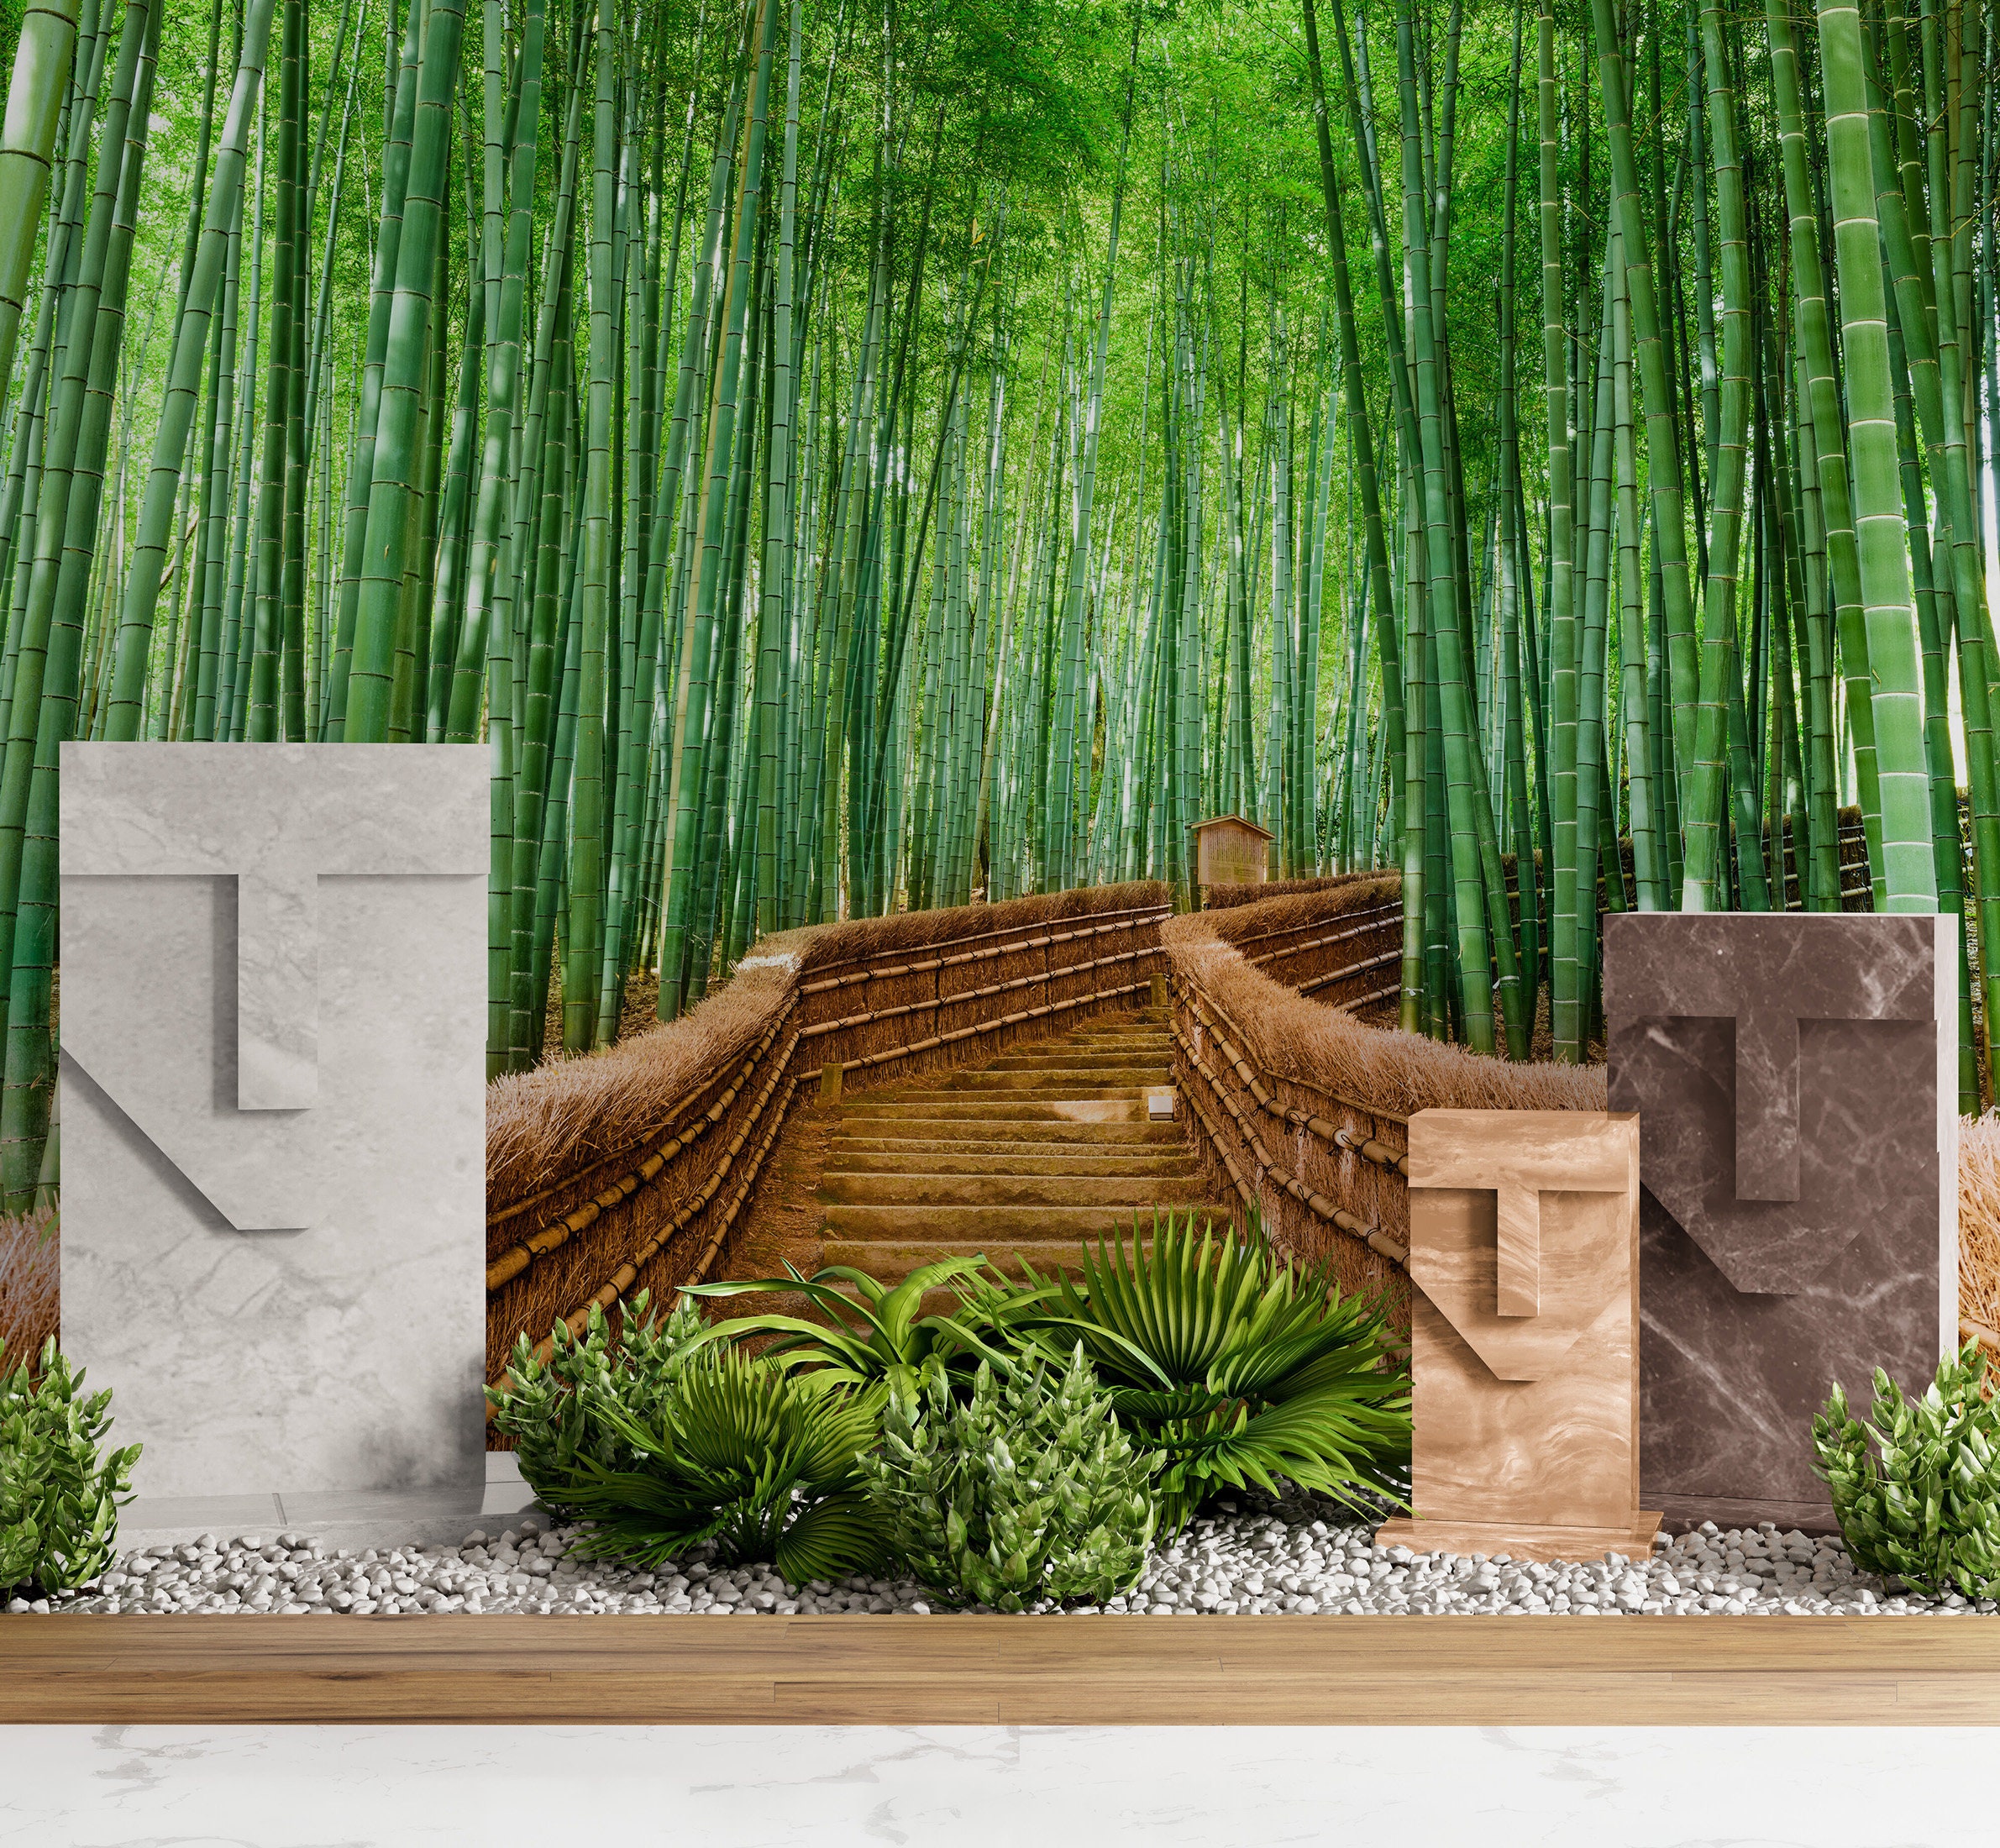 Japanese Bamboo Forest Wallpaper Peel and Stick Wall Mural. Peaceful,  Serenity, Zen Background Wallpaper. Japan Theme Wall Decor. 6043 